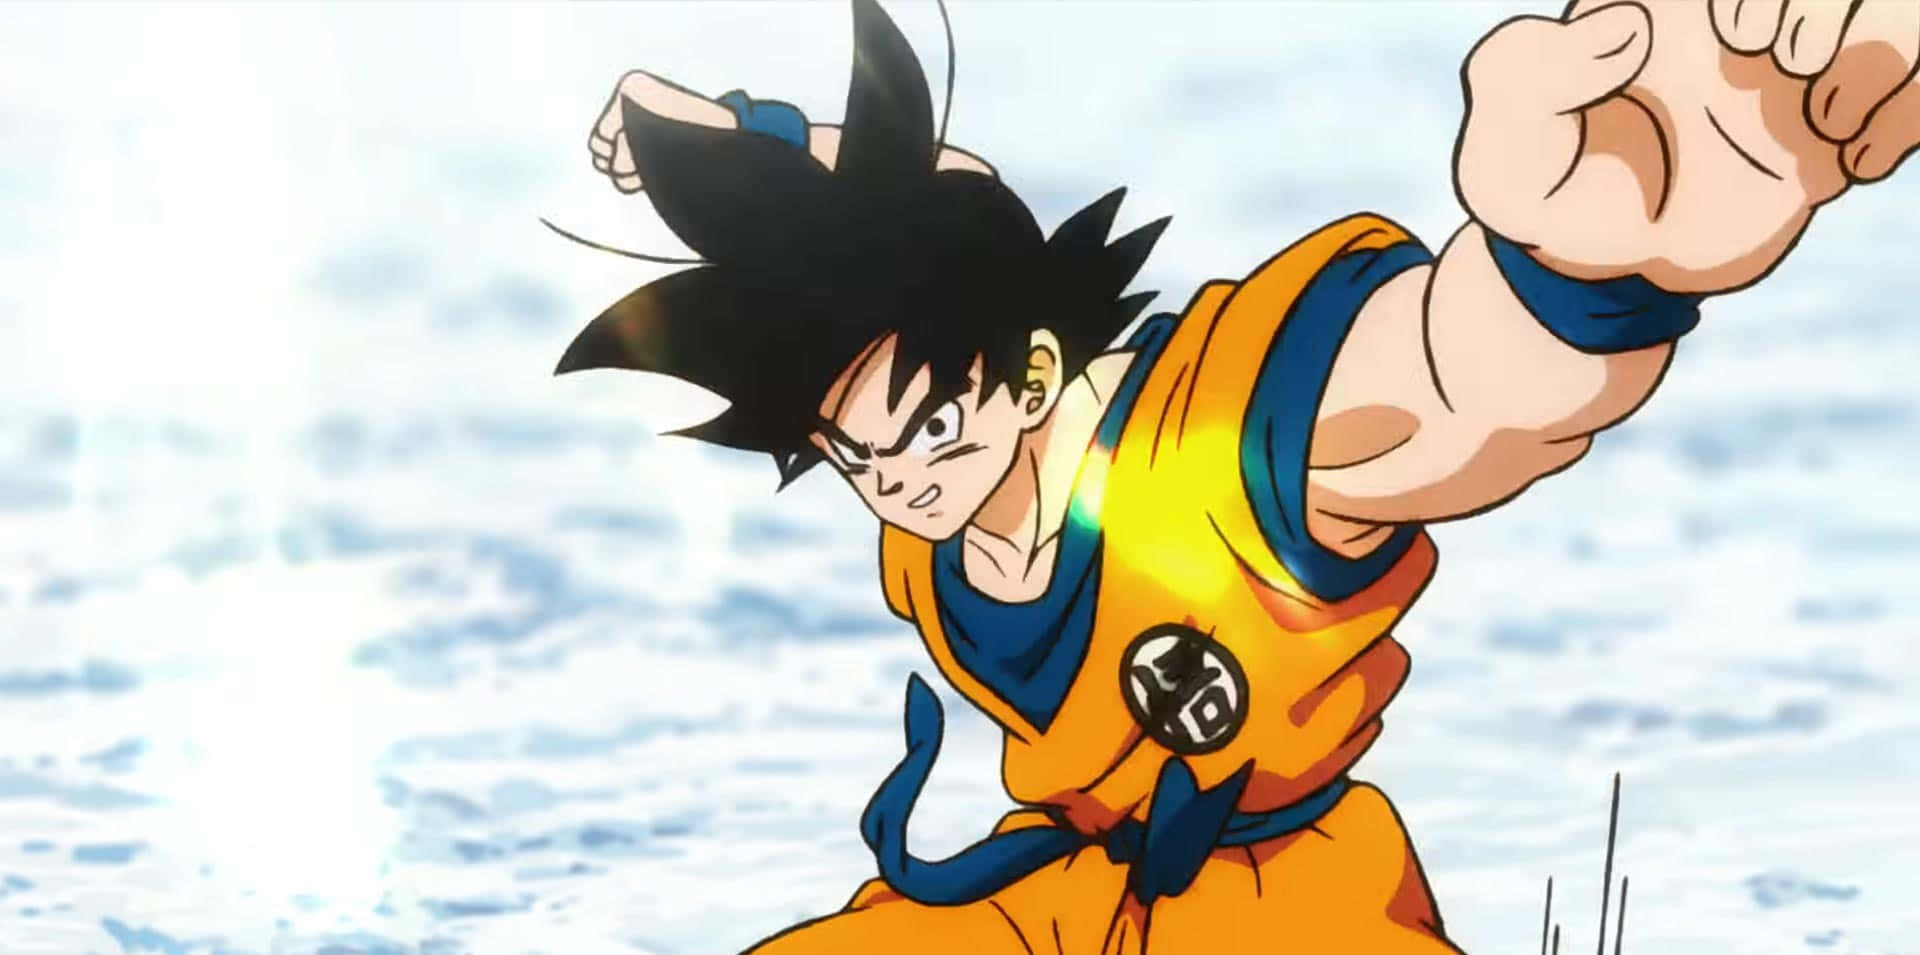 The star of Dragon Ball Movies, Goku, is ready for adventure Wallpaper